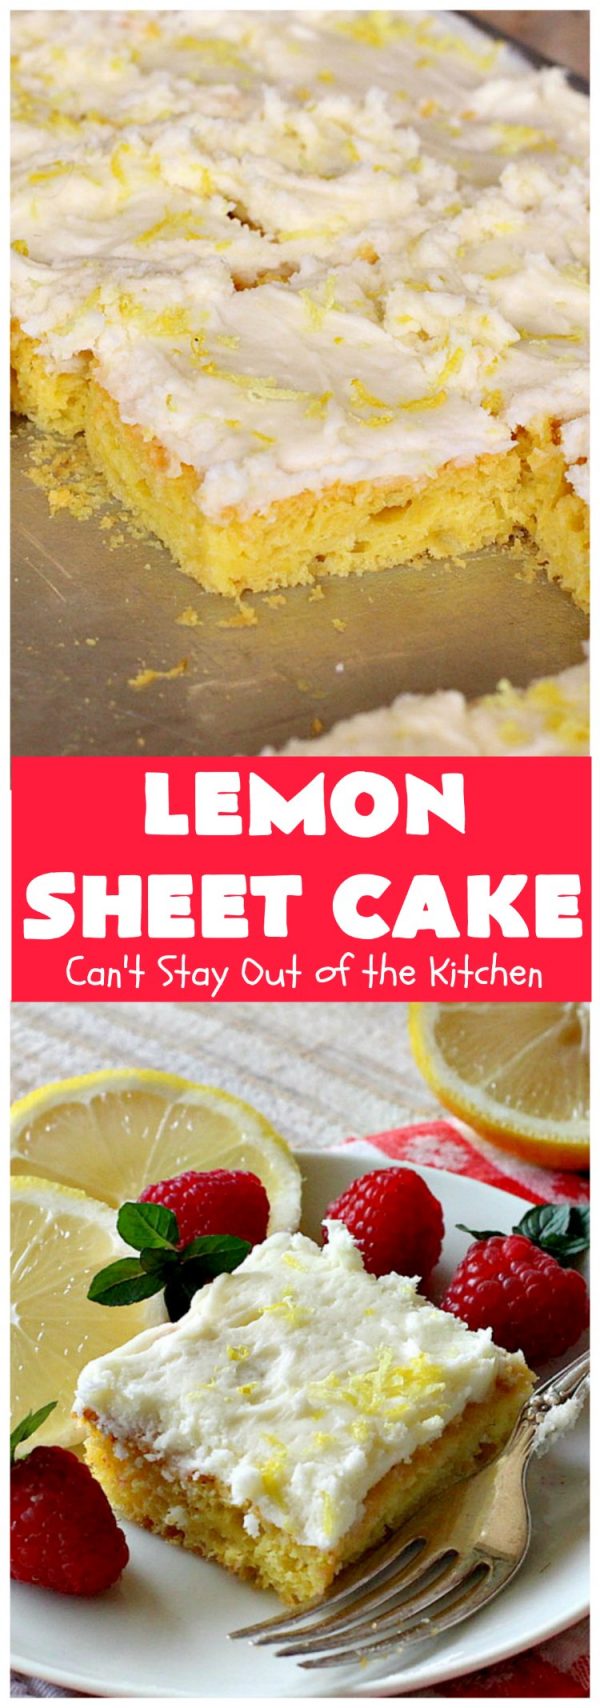 Lemon Sheet Cake – Can't Stay Out of the Kitchen